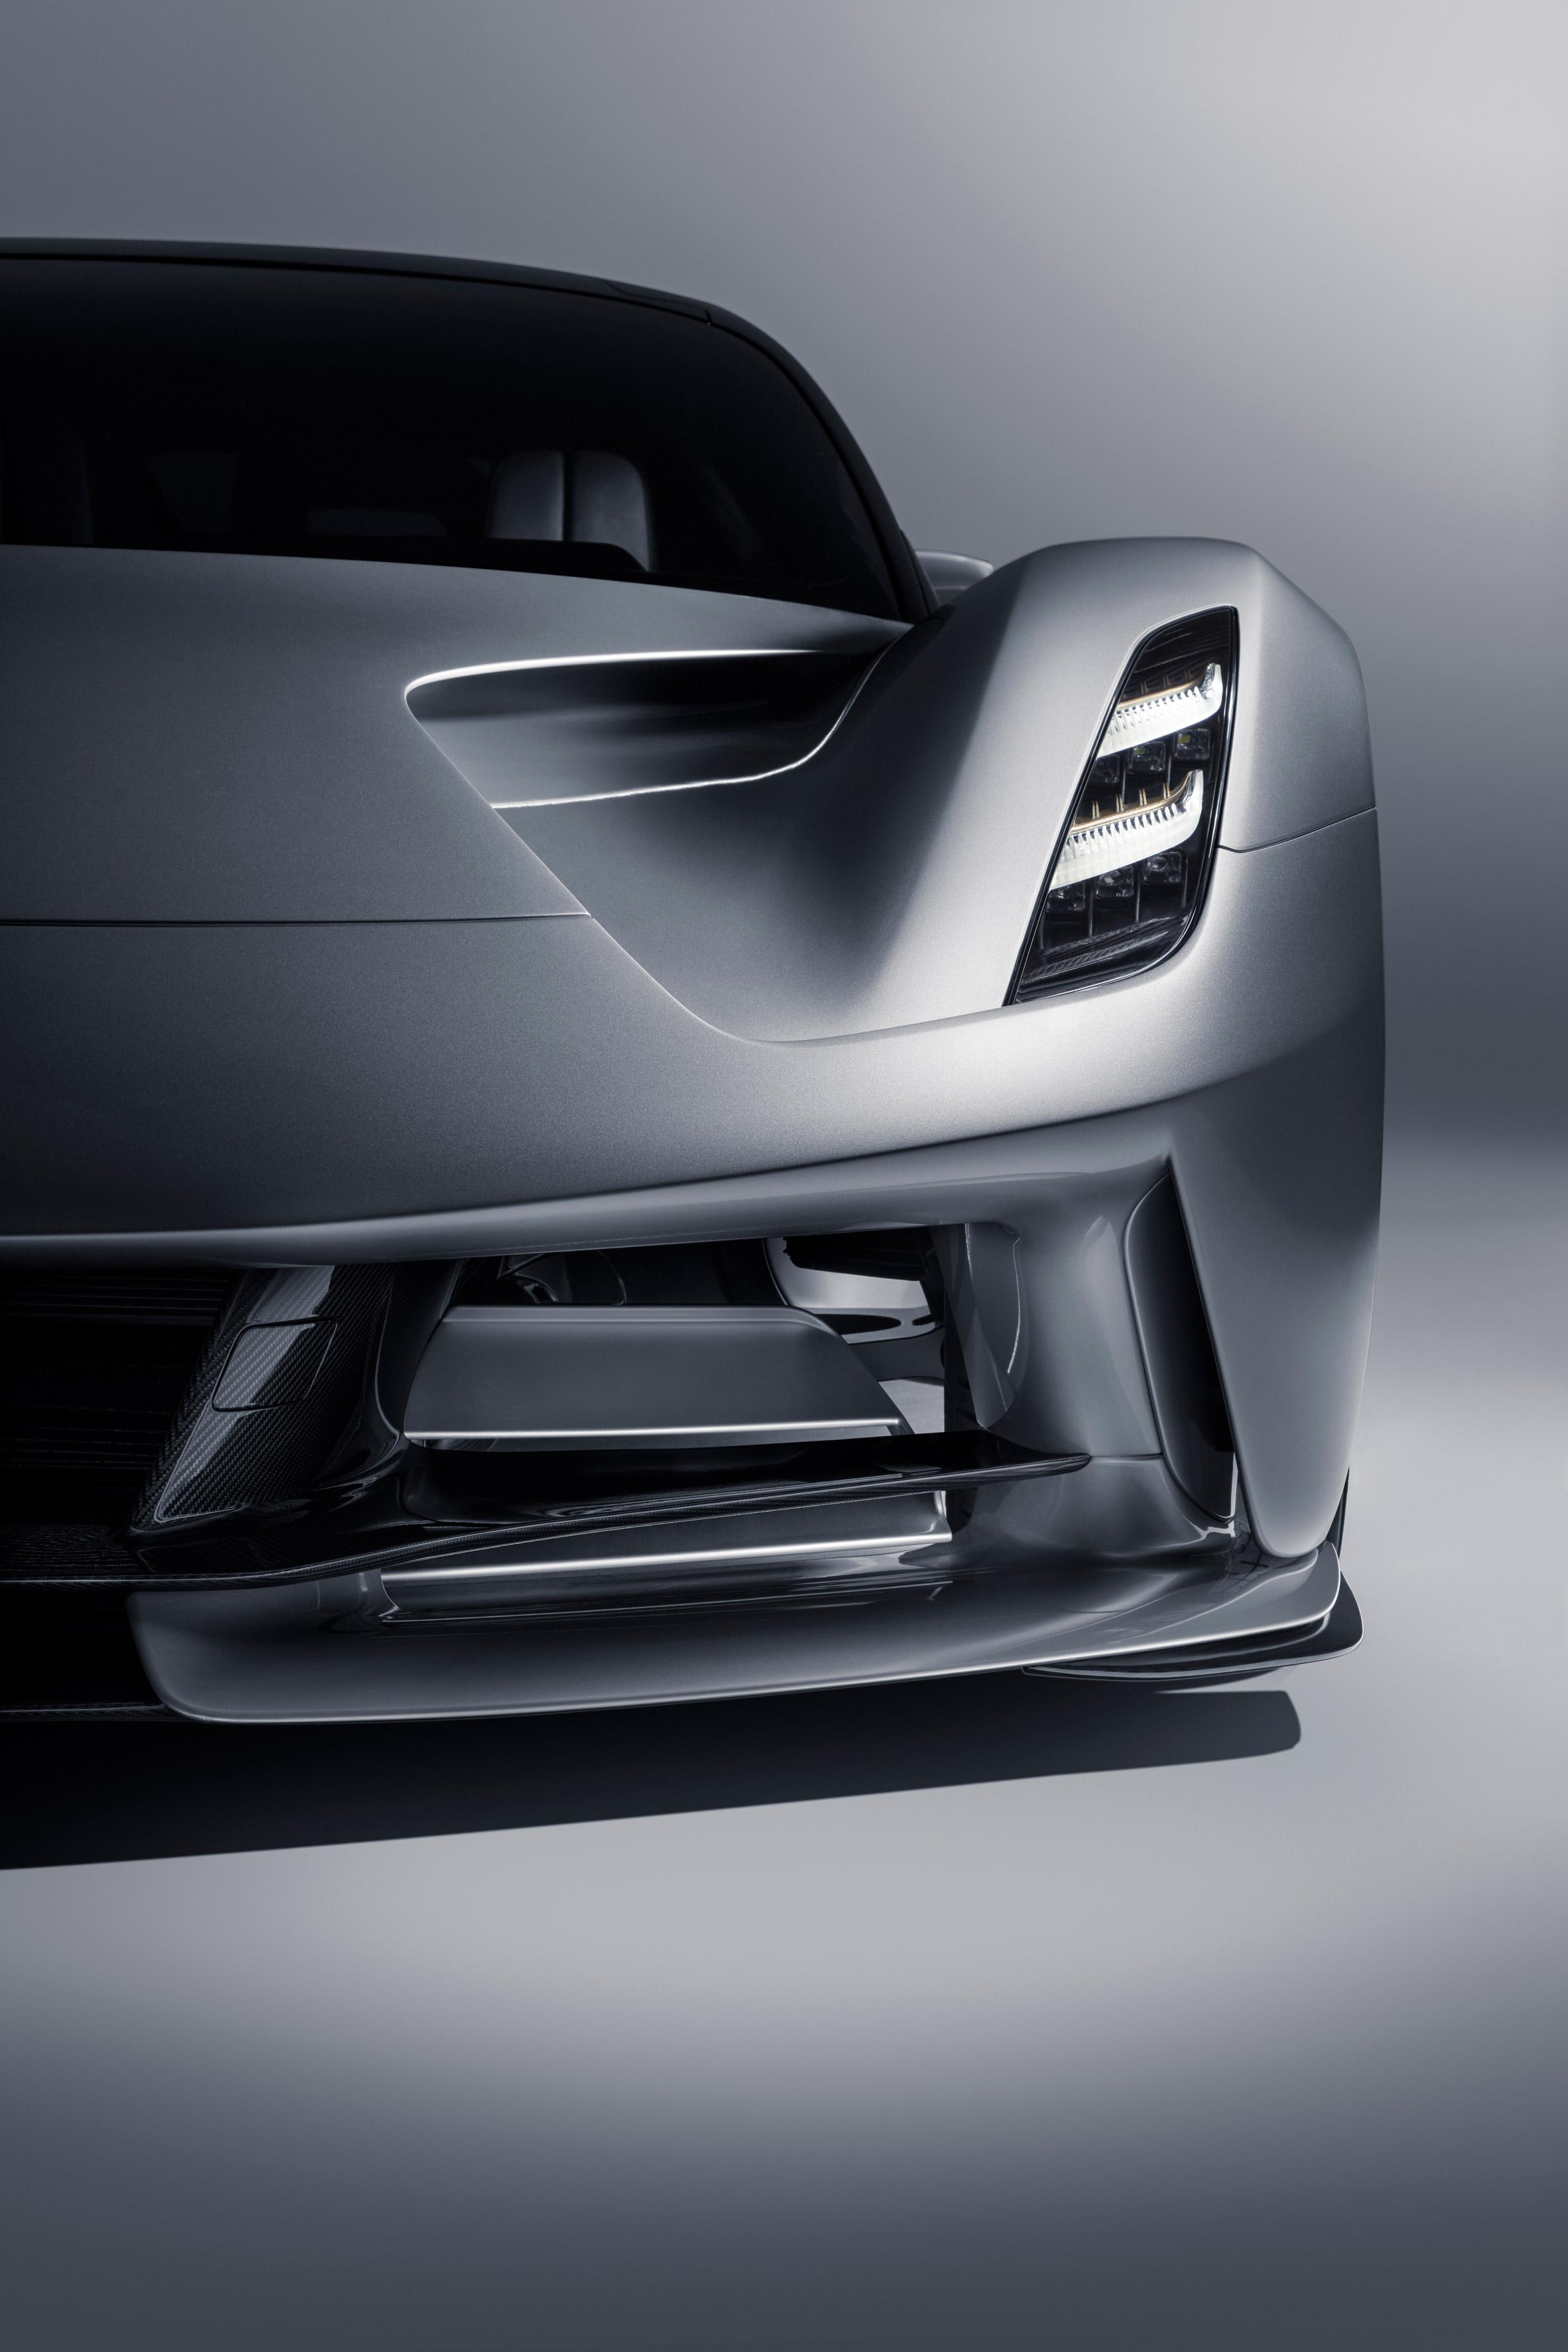 Lotus Evija is the first fully electric hypercar from